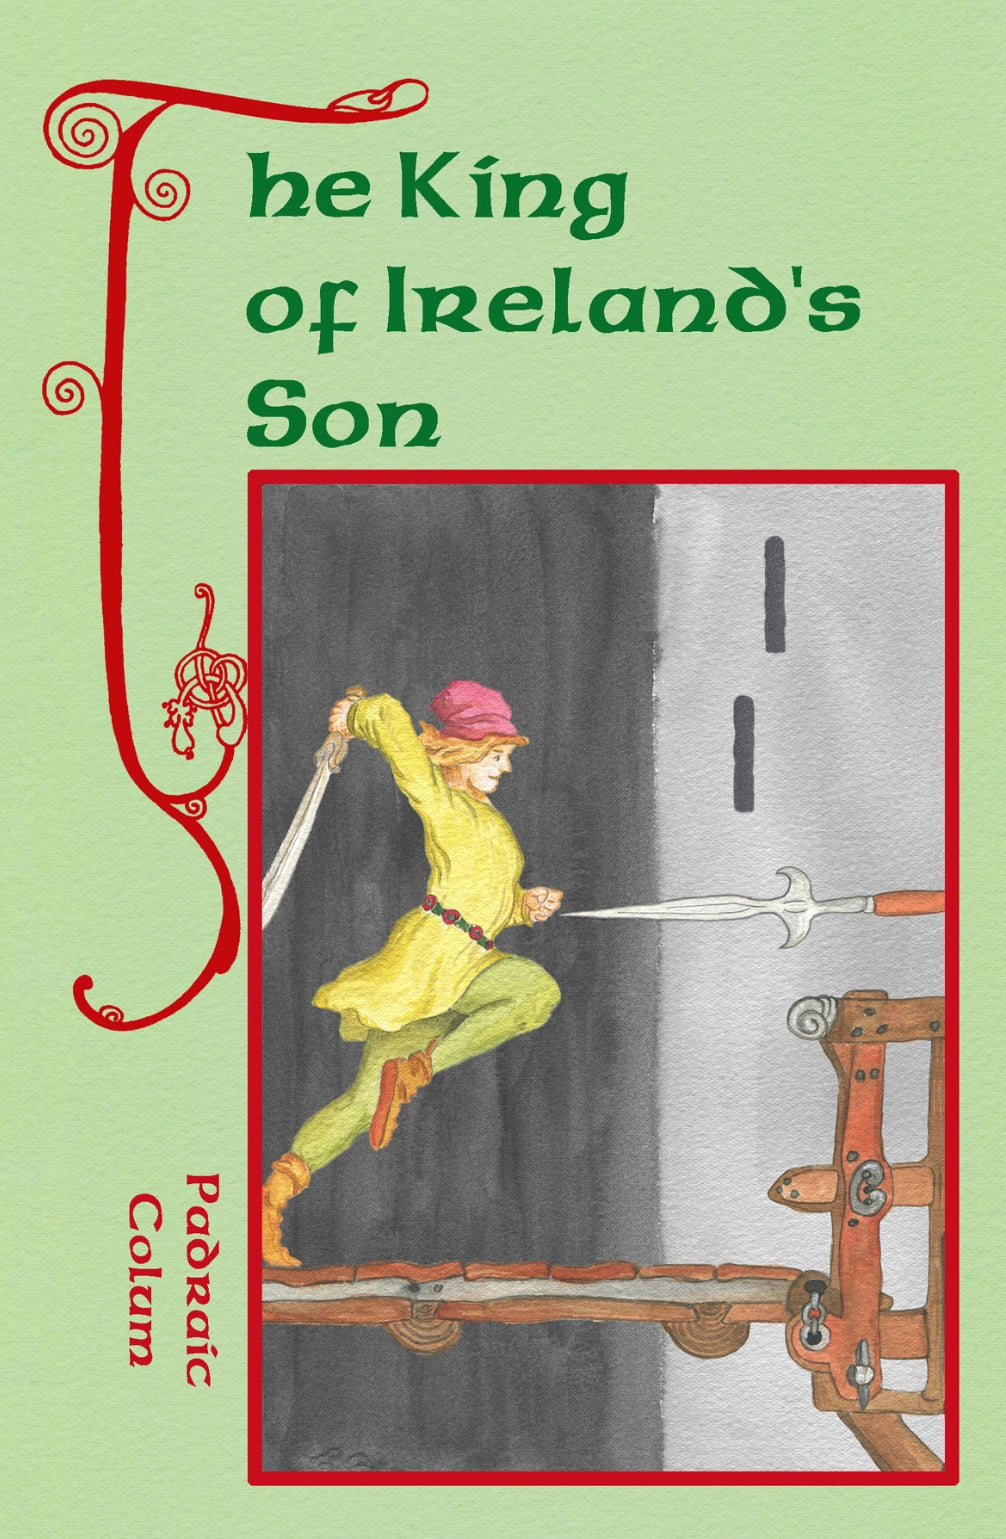 The King of Ireland’s Son by Padraic Colum and updated by Reg Down - Alder & Alouette